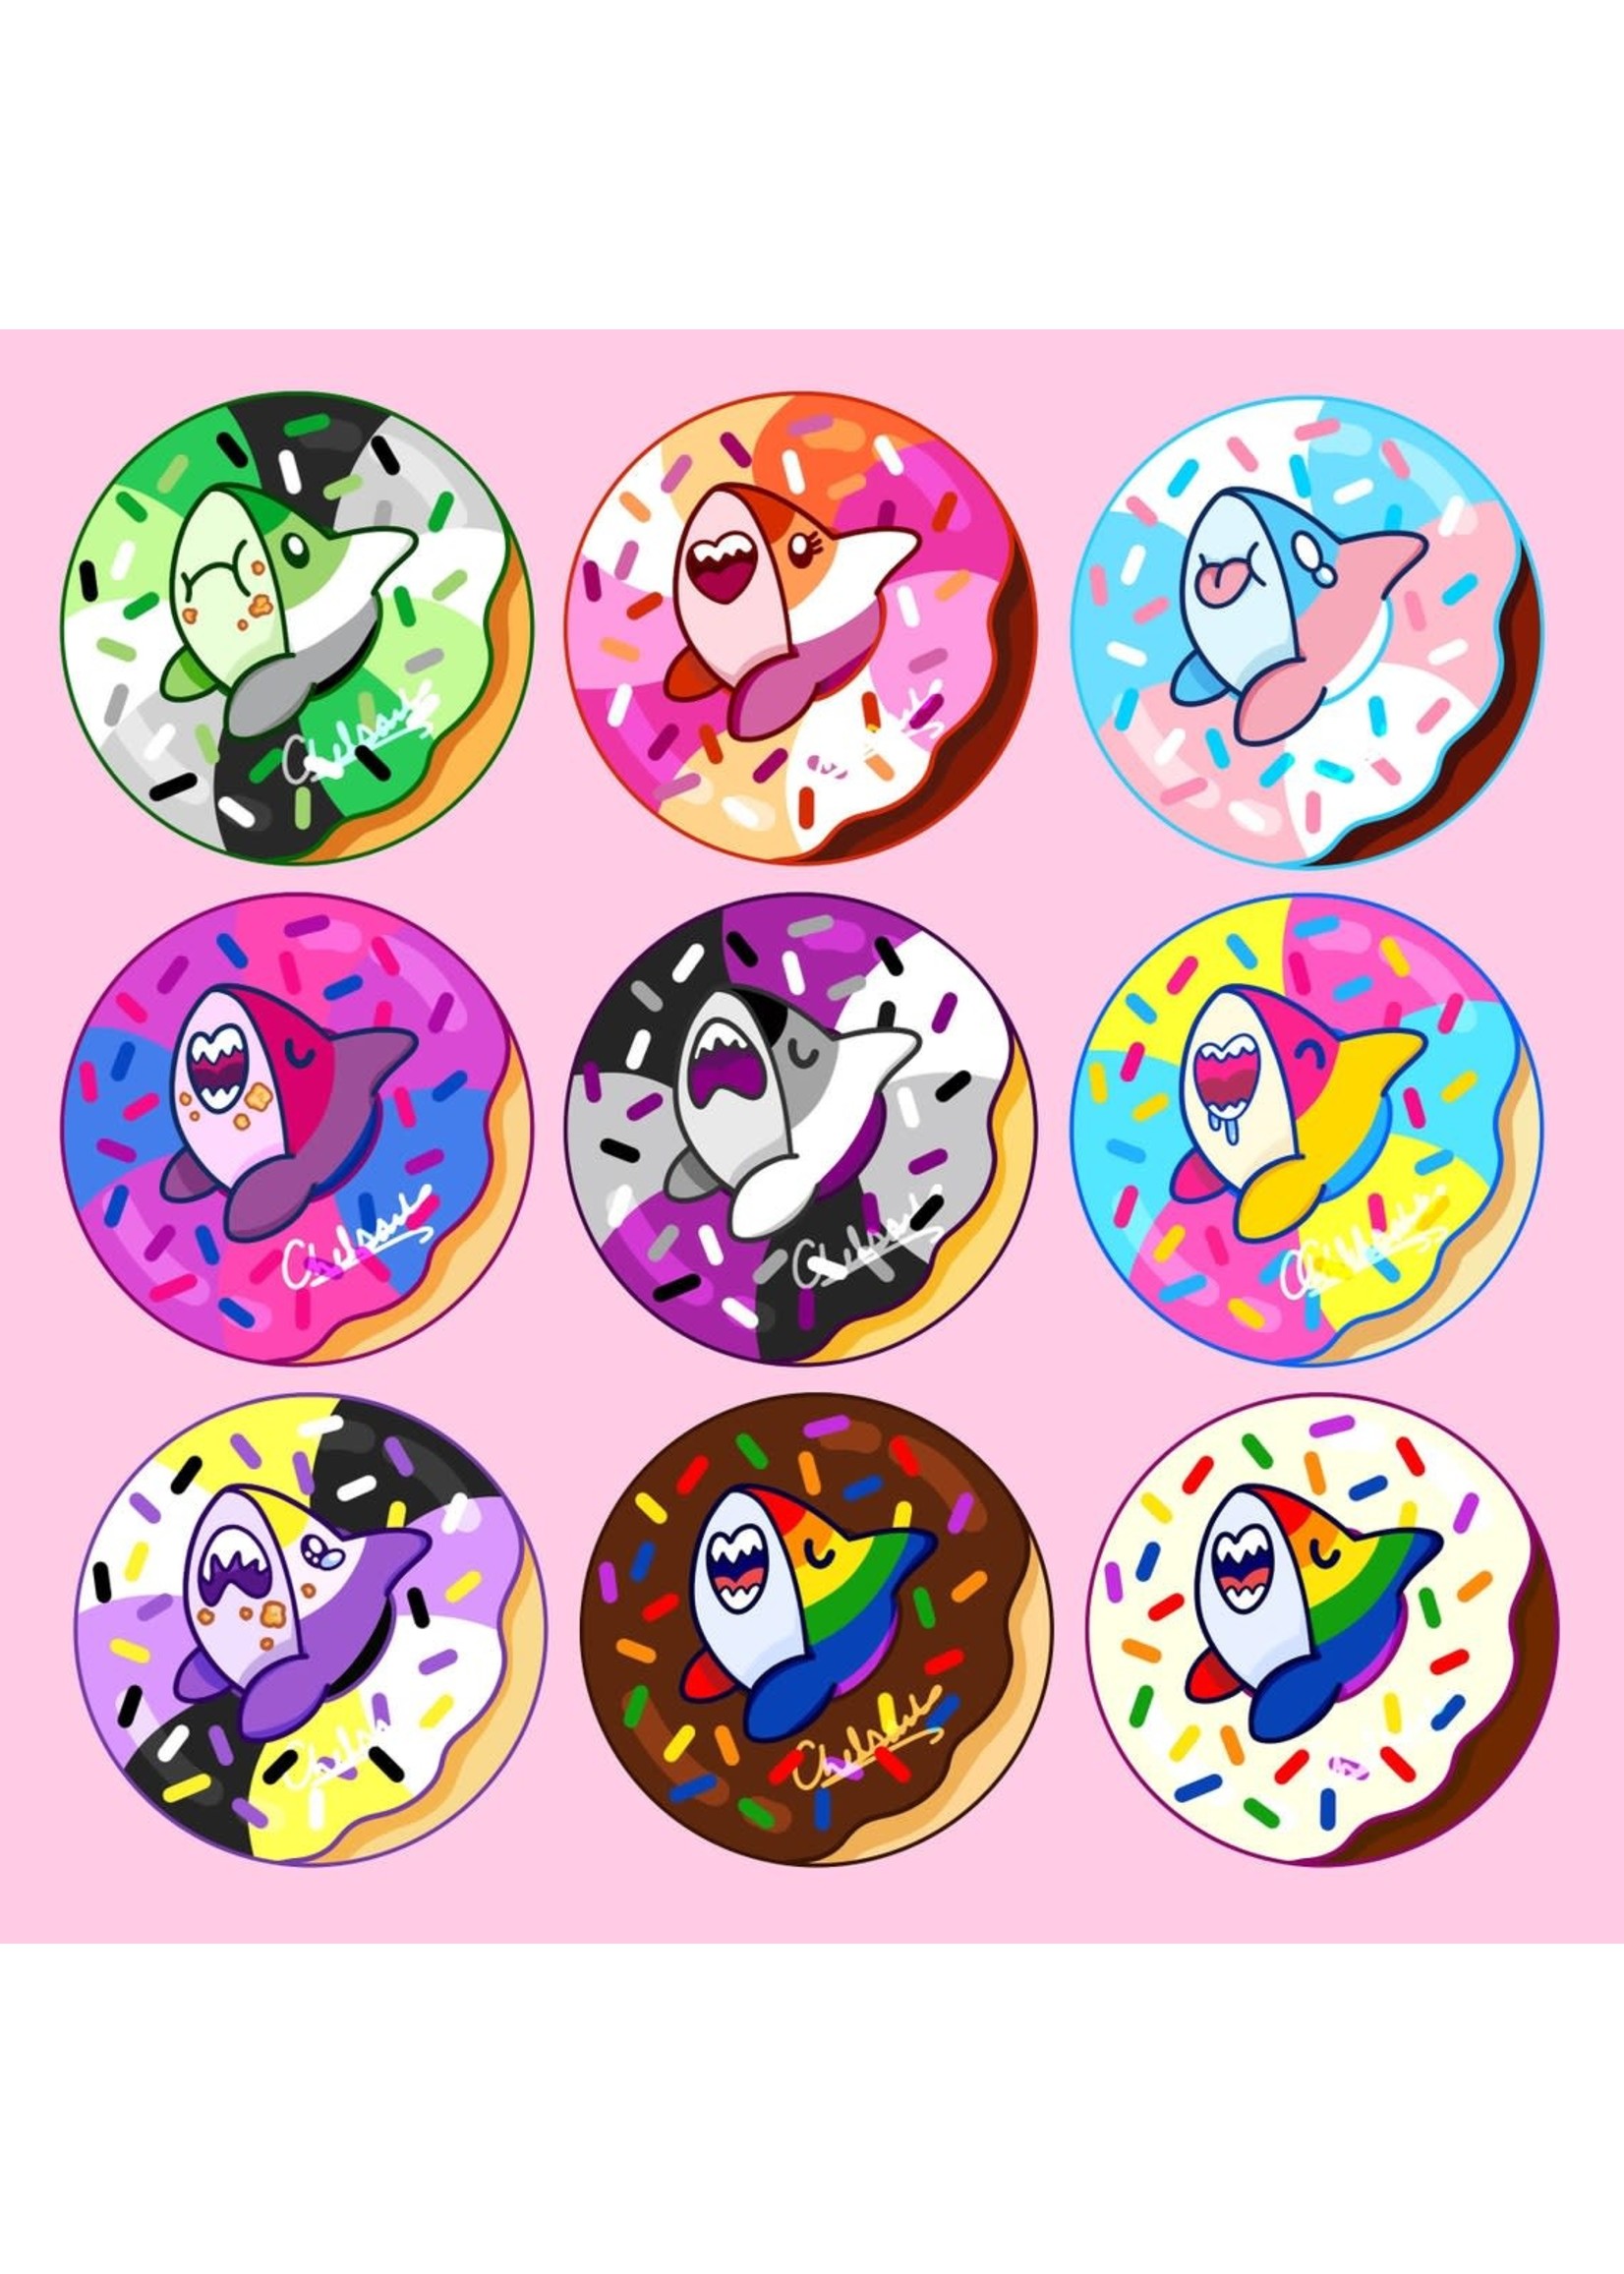 SHARKNDONUTS Pride Sharks and Donut Buttons Bisexual